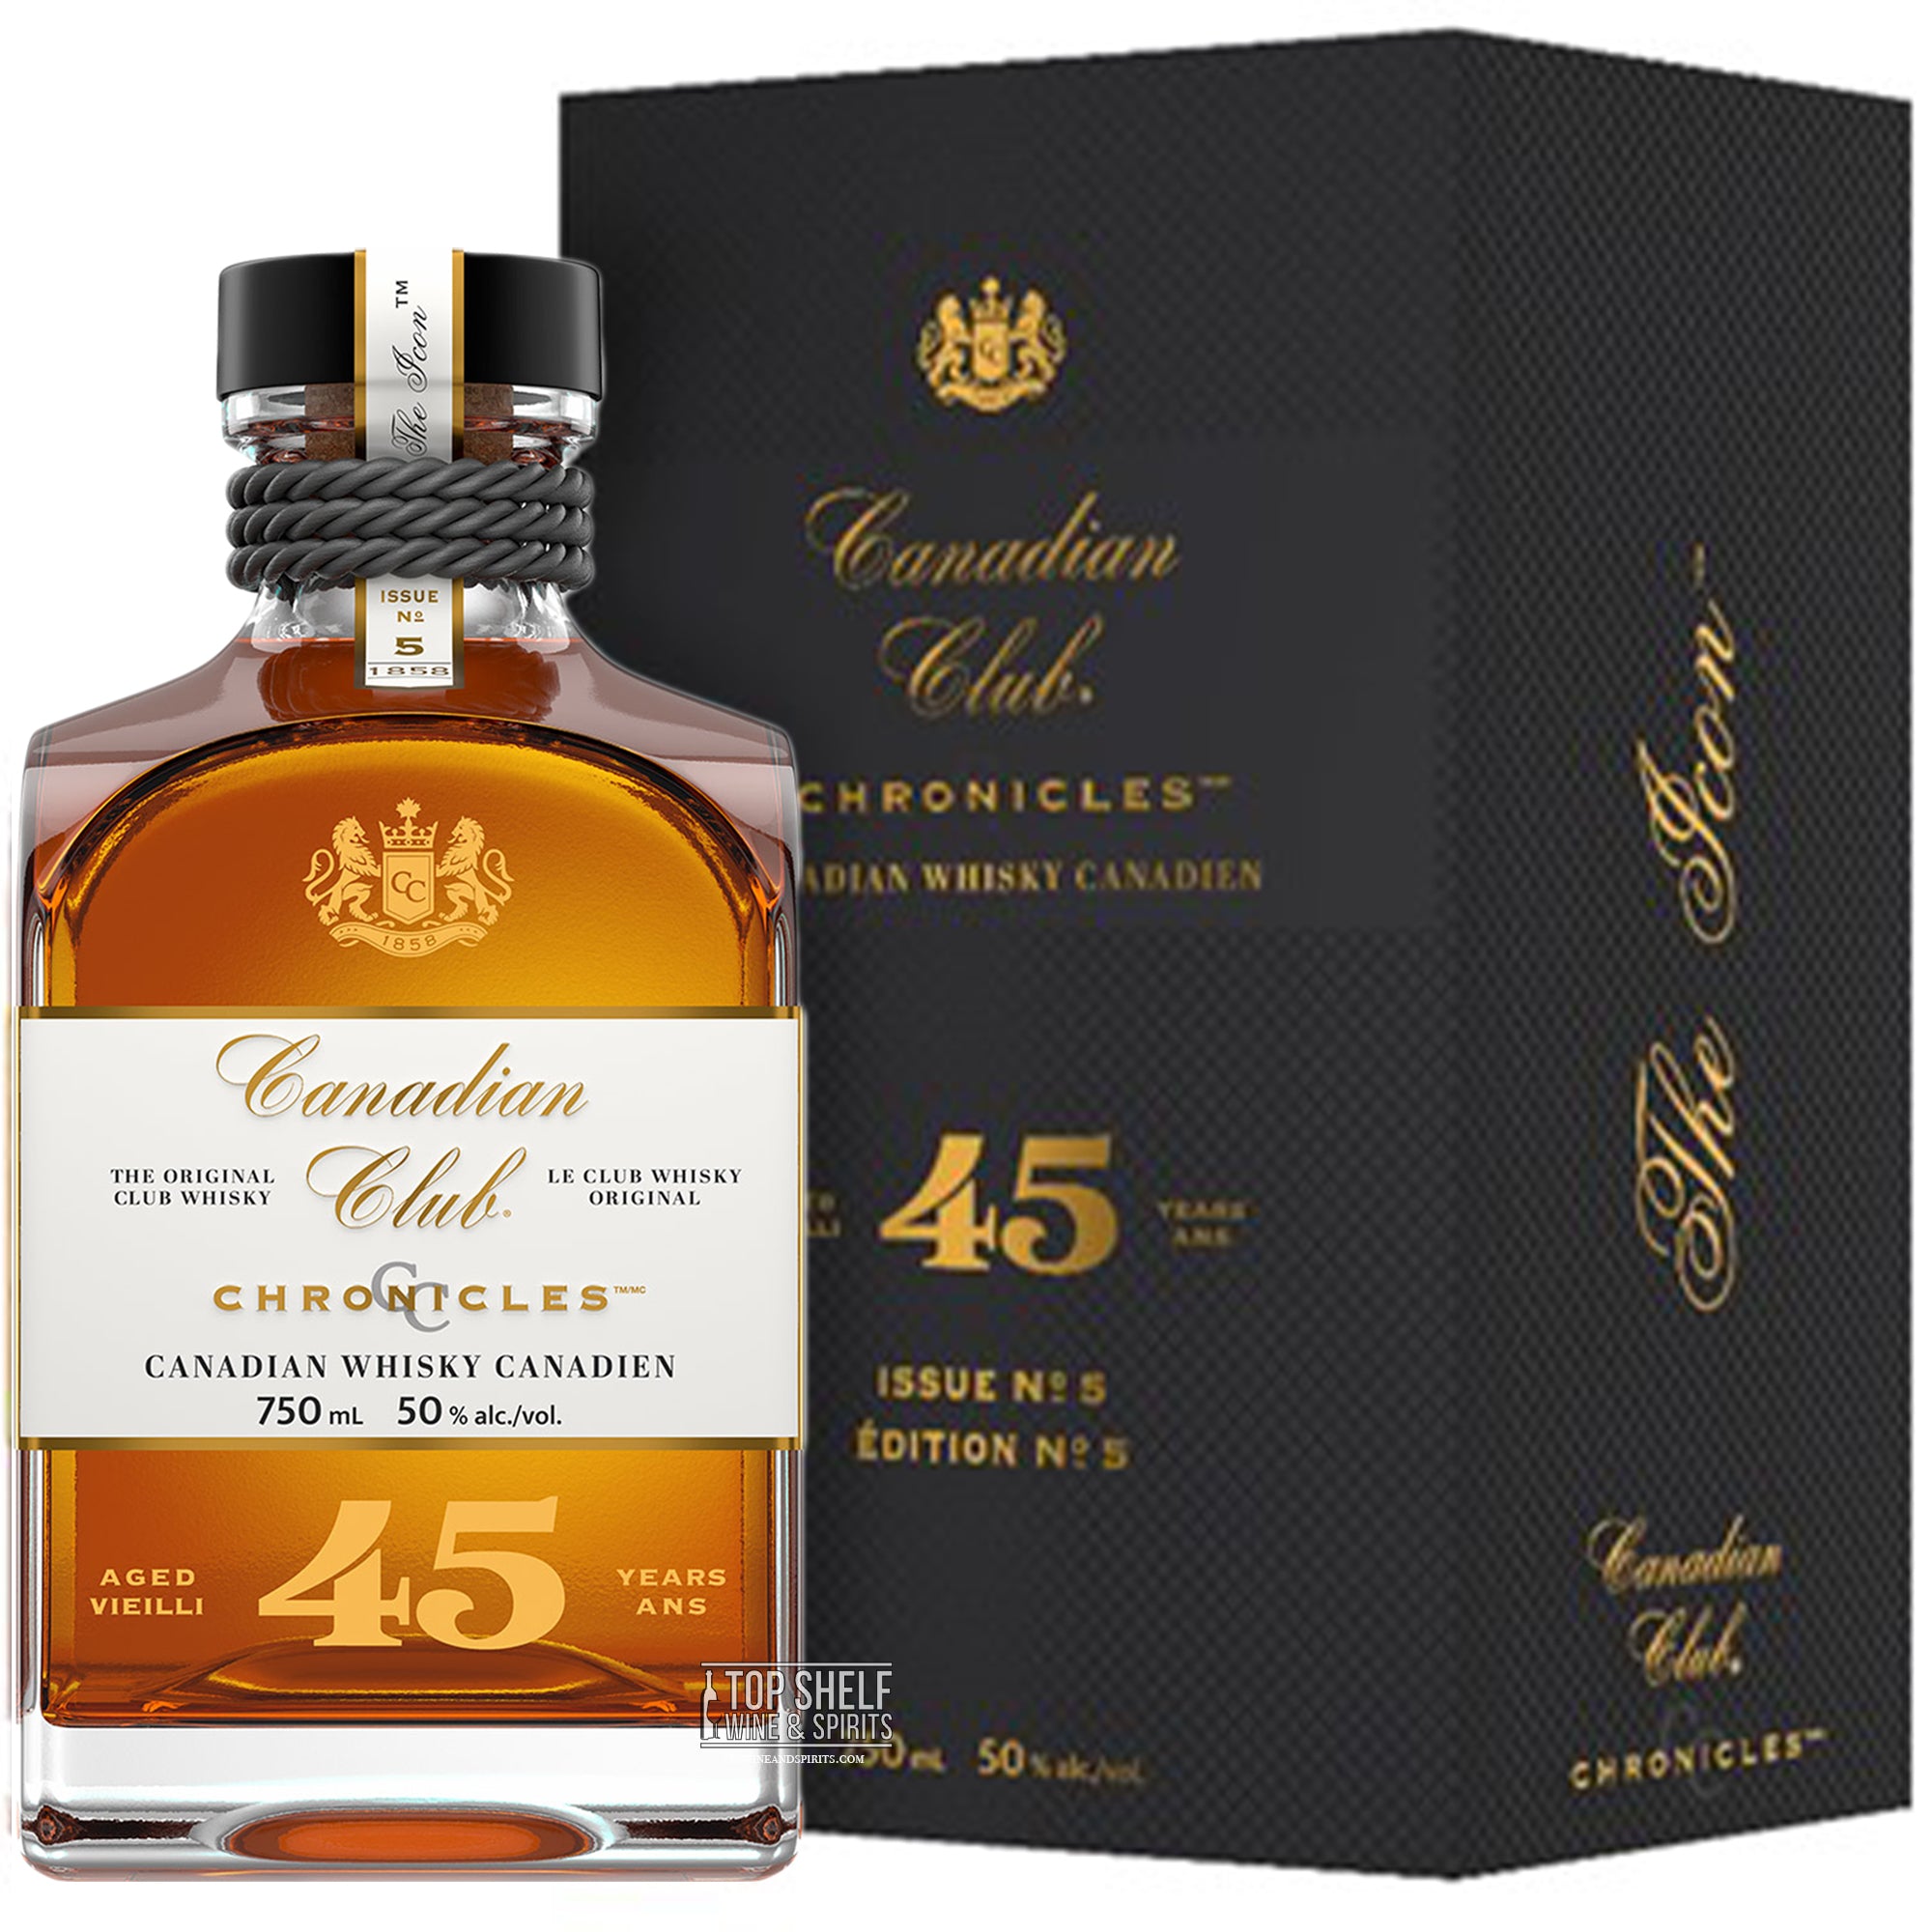 Canadian Club “The Icon” Chronicles 45 Year Old Canadian Whiskey